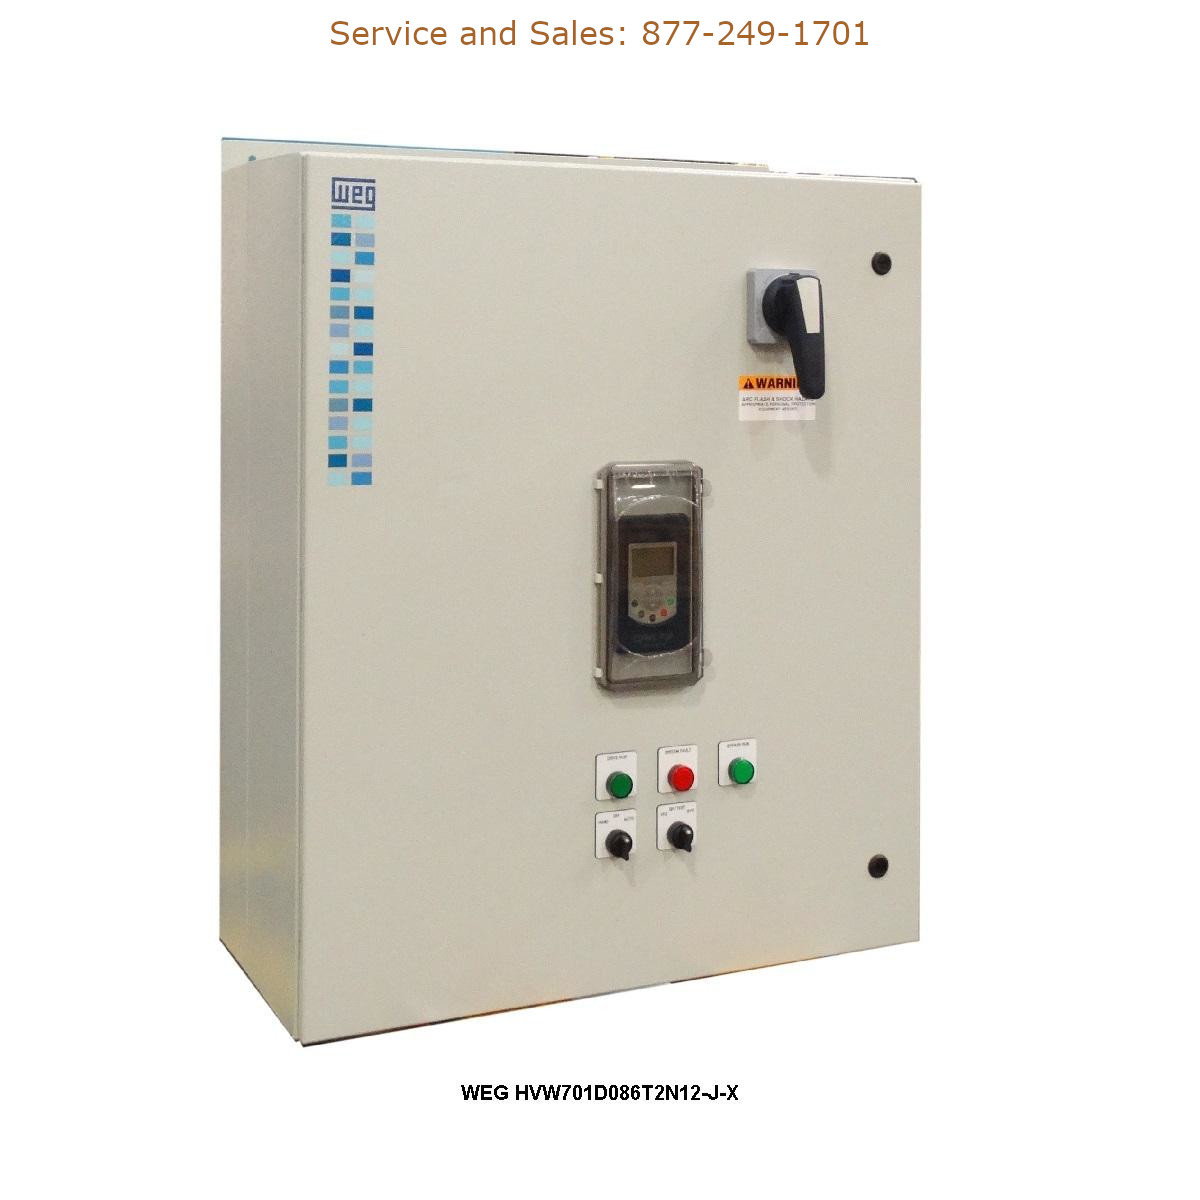 WEG HVW701D086T2N12-J-X WEG Model Number HVW701D086T2N12-J-X WEG Drives, Variable Speed Drives Repair Service, Troubleshooting, Replacement Parts https://gesrepair.com/wp-content/uploads/2022/WEG/WEG_HVW701D086T2N12-J-X_Drives_Variable_Speed_Drives.jpg